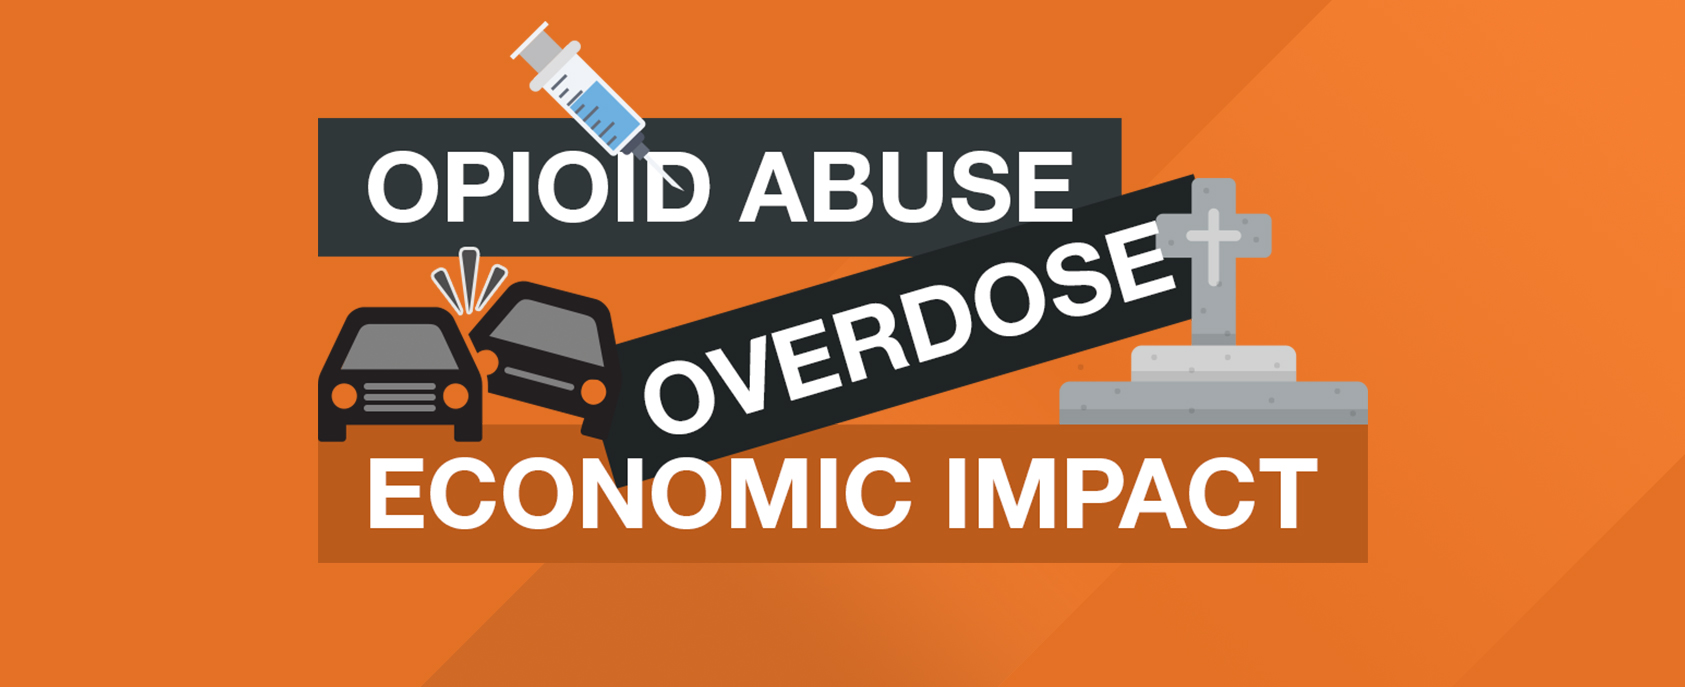 Opioid Abuse Economic Impact Graphic Showing Needle, Grave and Car Crash